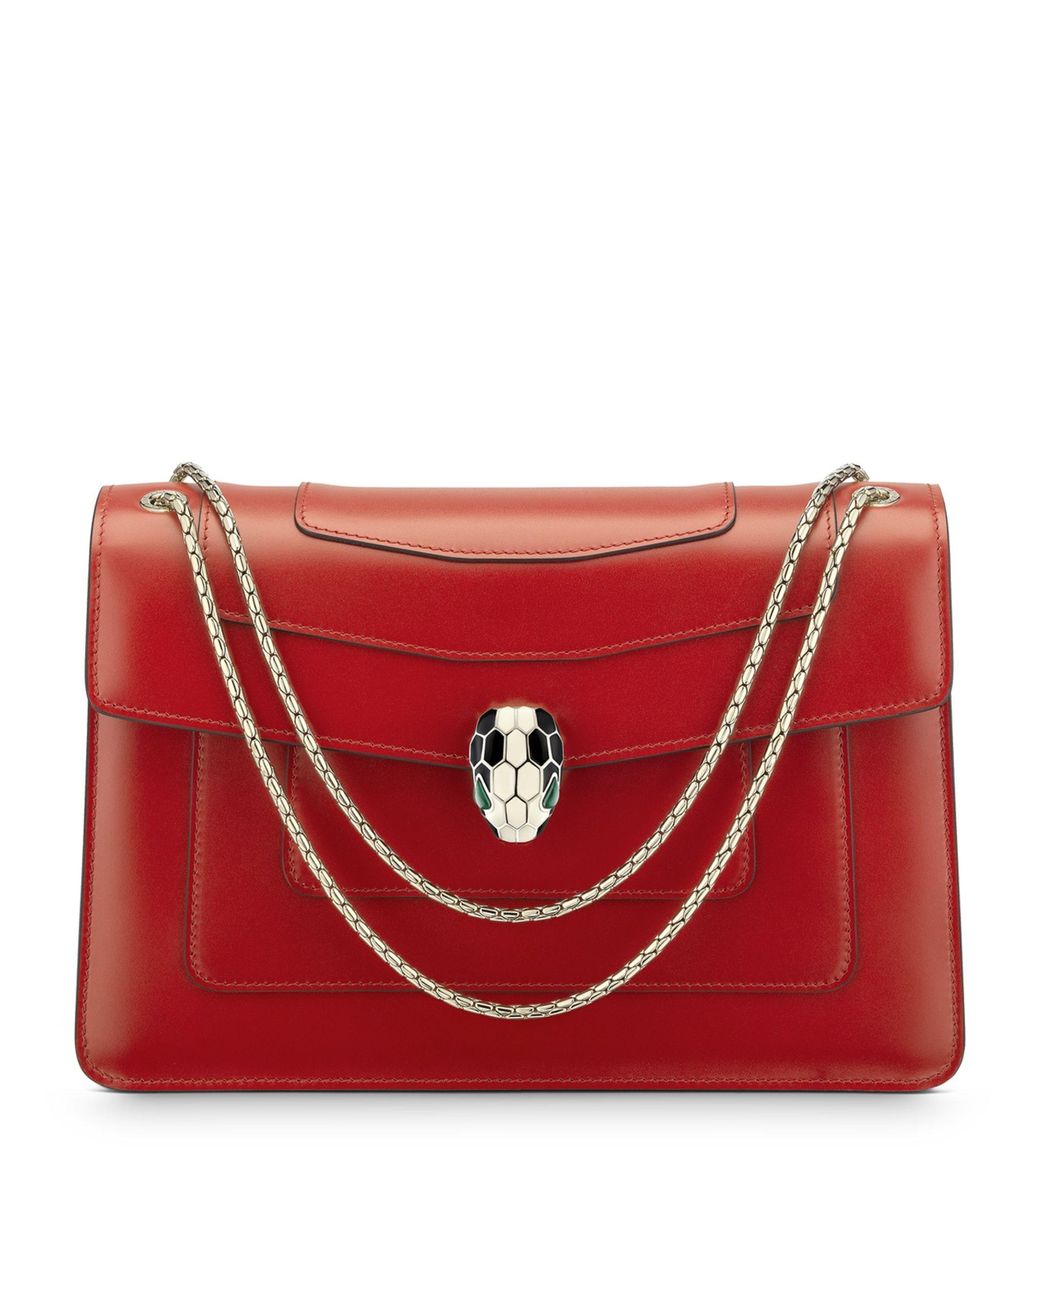 BVLGARI Red Serpenti Forever Leather Shoulder Bag | Lyst